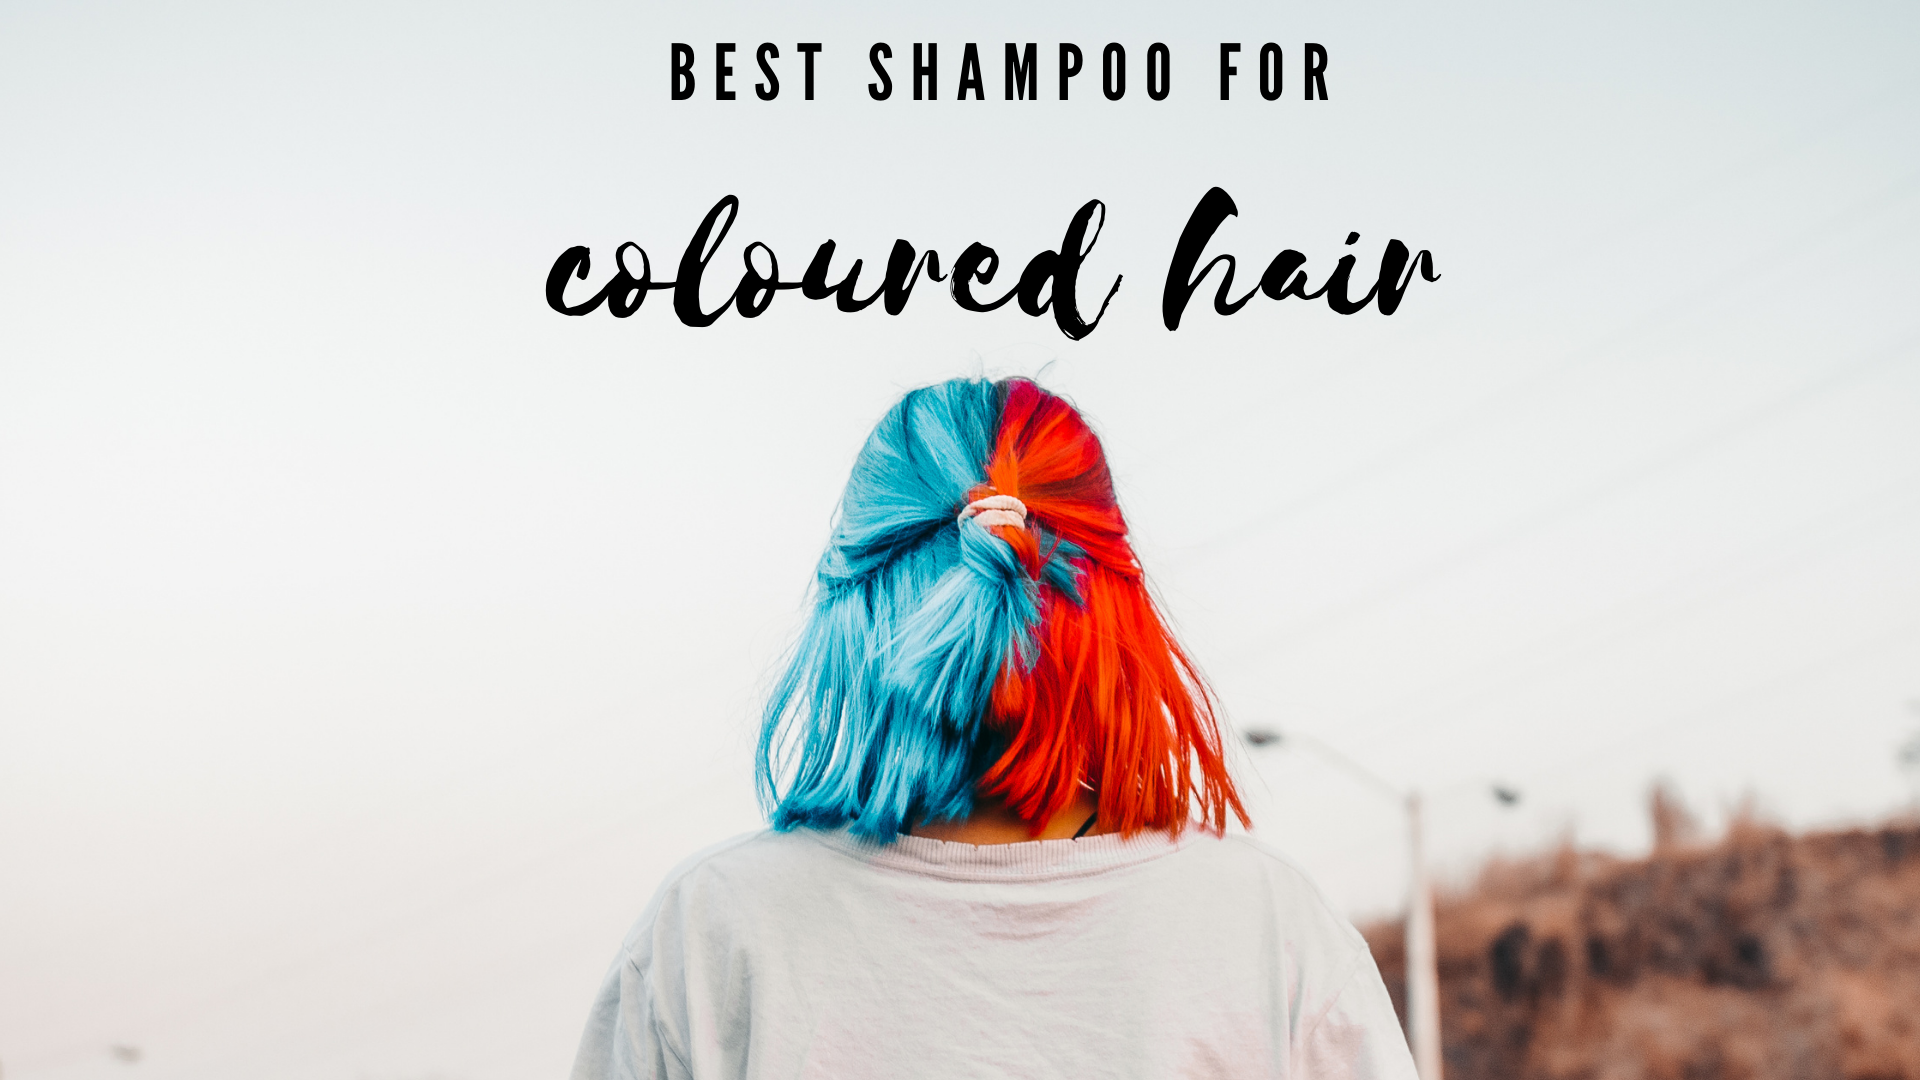 17 Best Shampoo For Coloured Hair In India 2022 - To Protect Your Locks